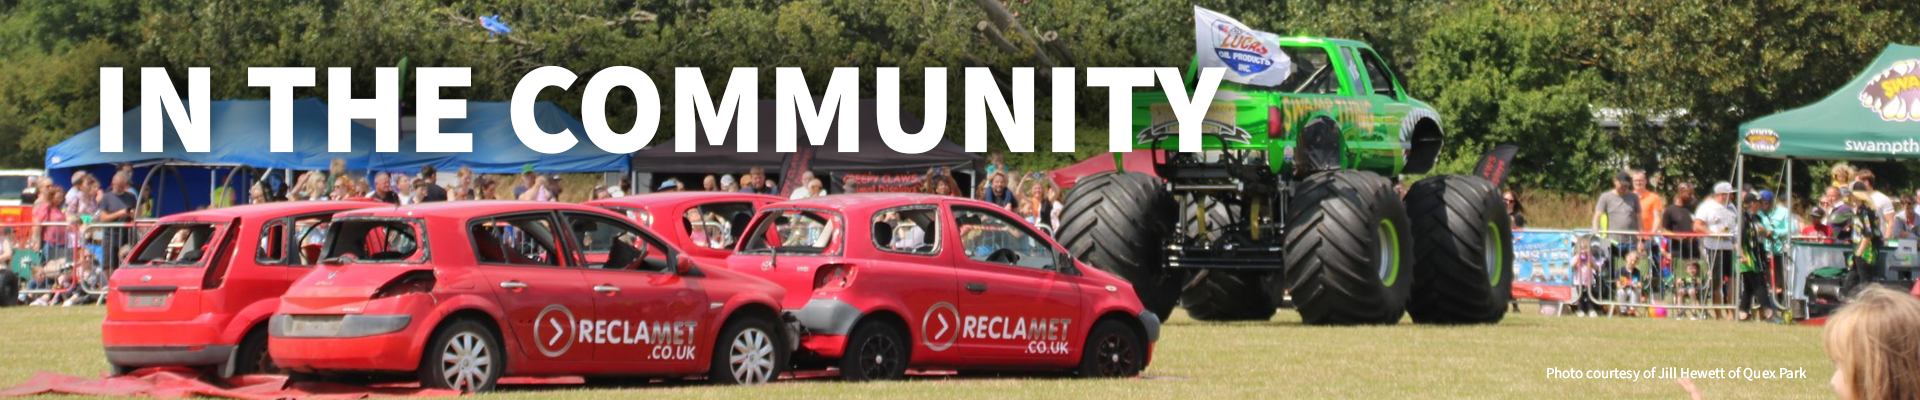 In the Community with Reclamet Limited.